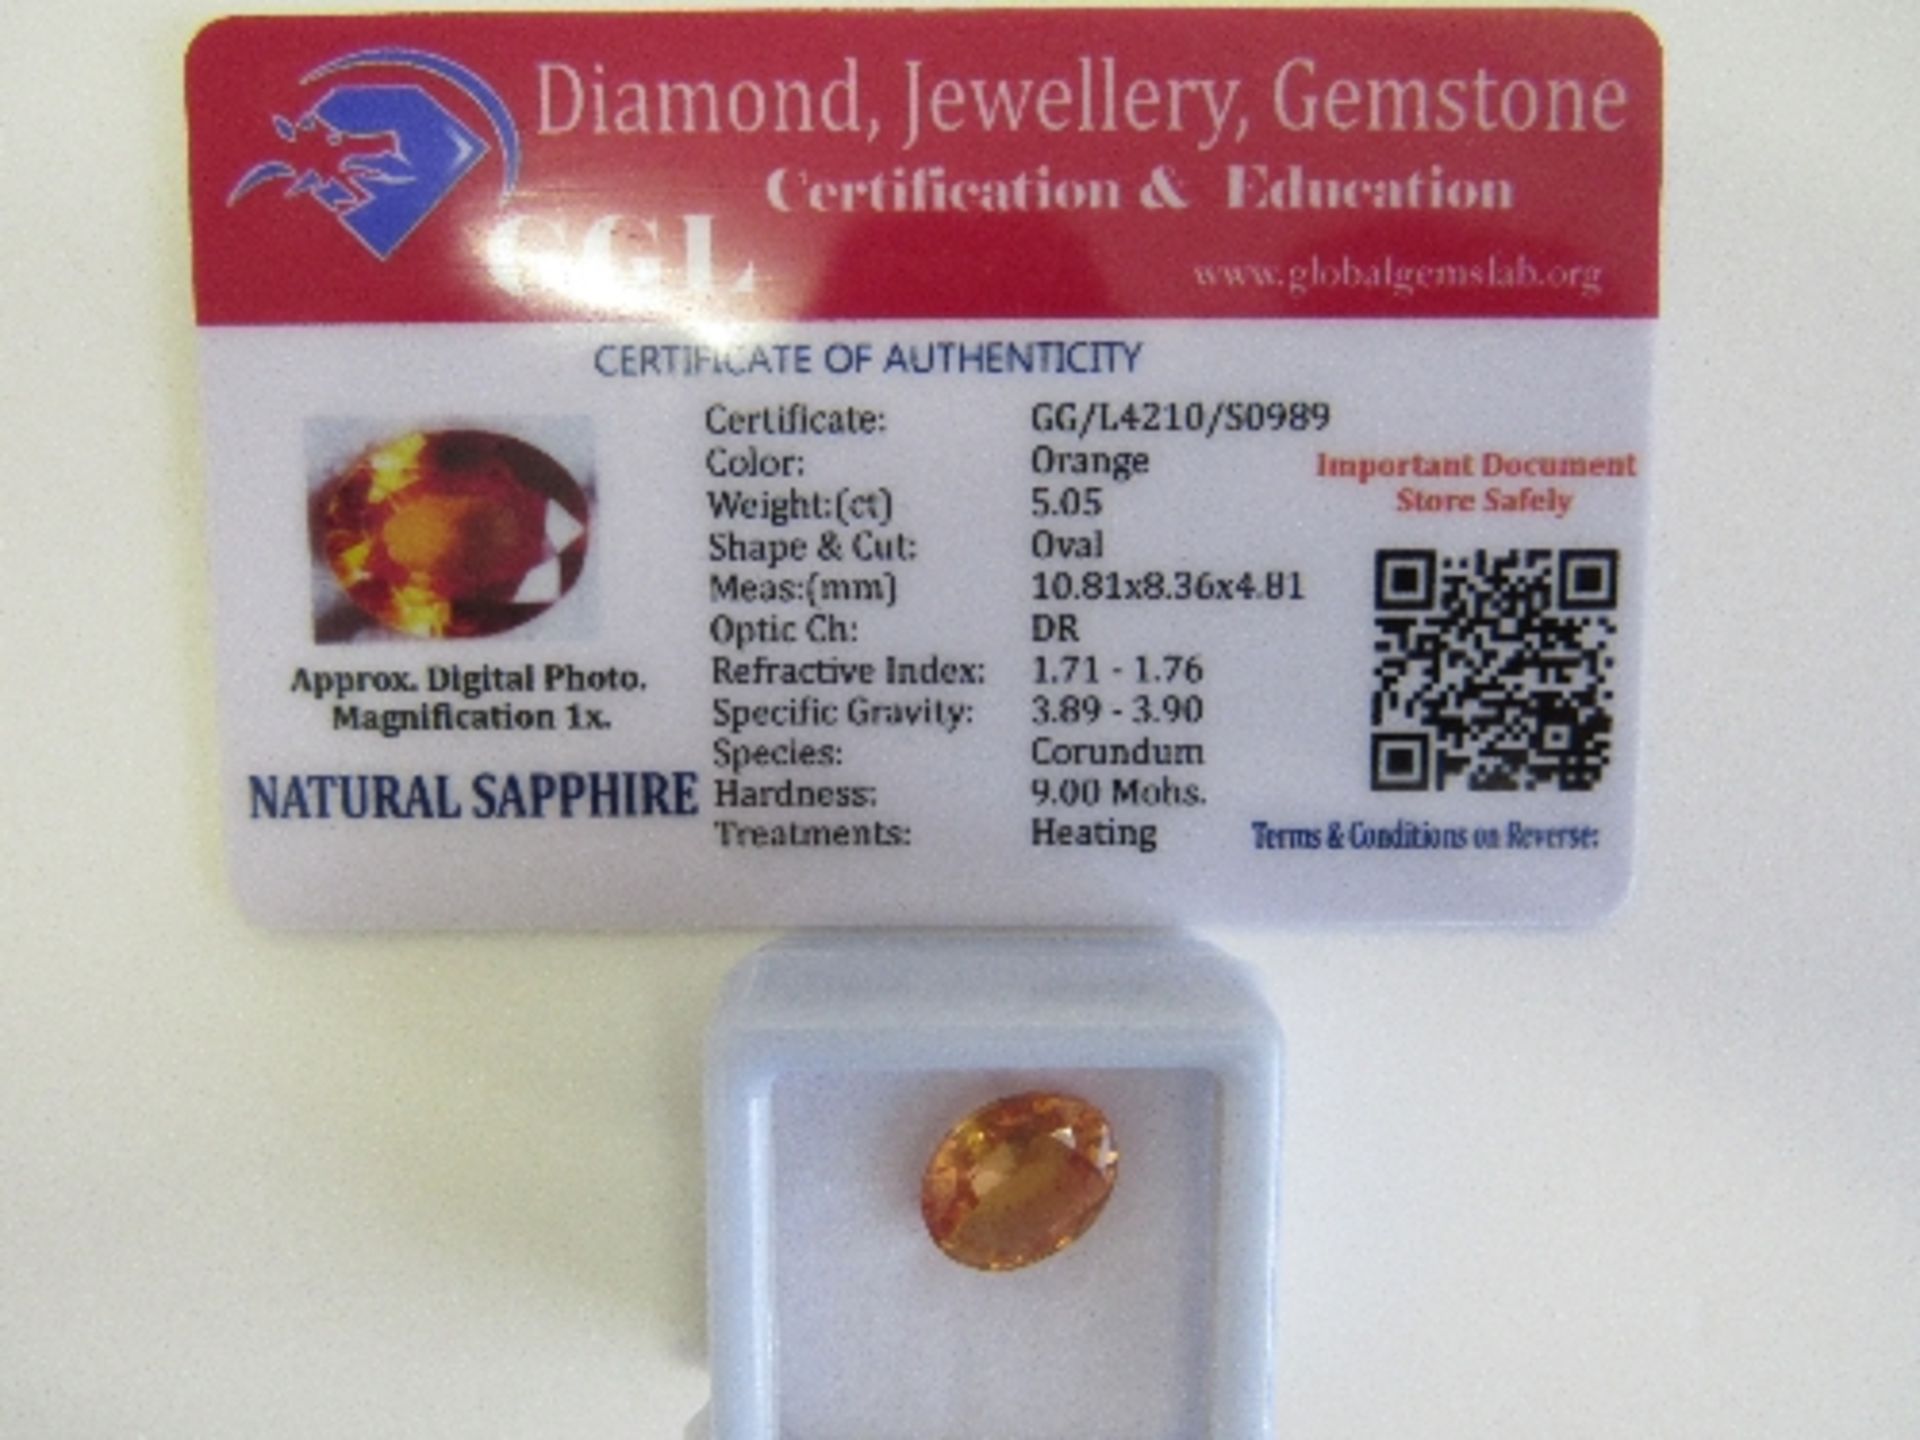 Natural oval cut orange sapphire, weight 5.05 carat, with certificate. Estimate £50-70 - Image 2 of 2